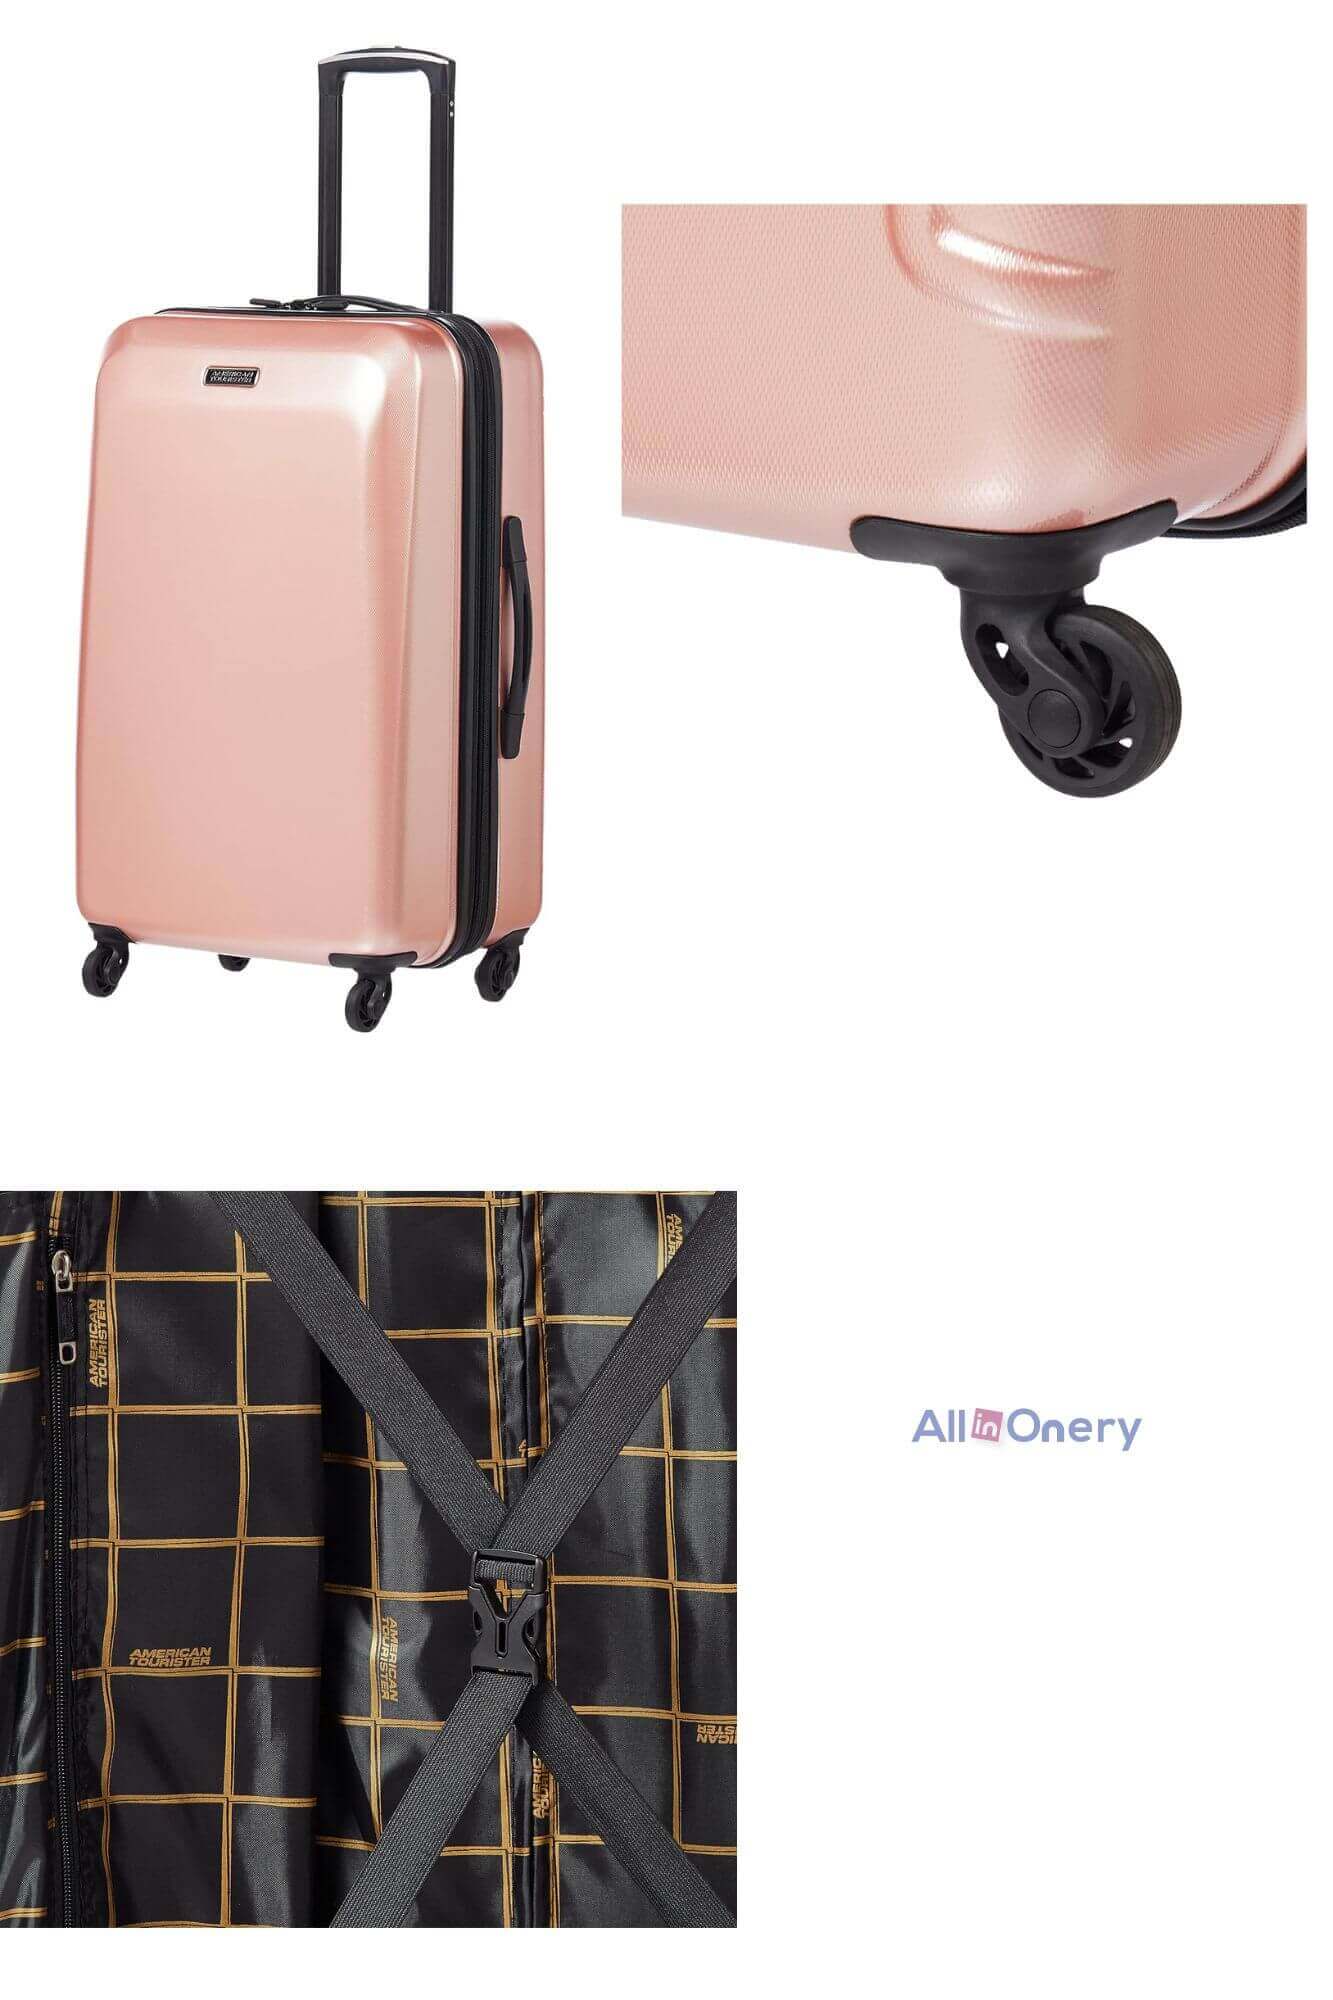 American Tourister Moonlight Carry-On 21-inch Hardside Expandable Luggage with Spinner Wheels